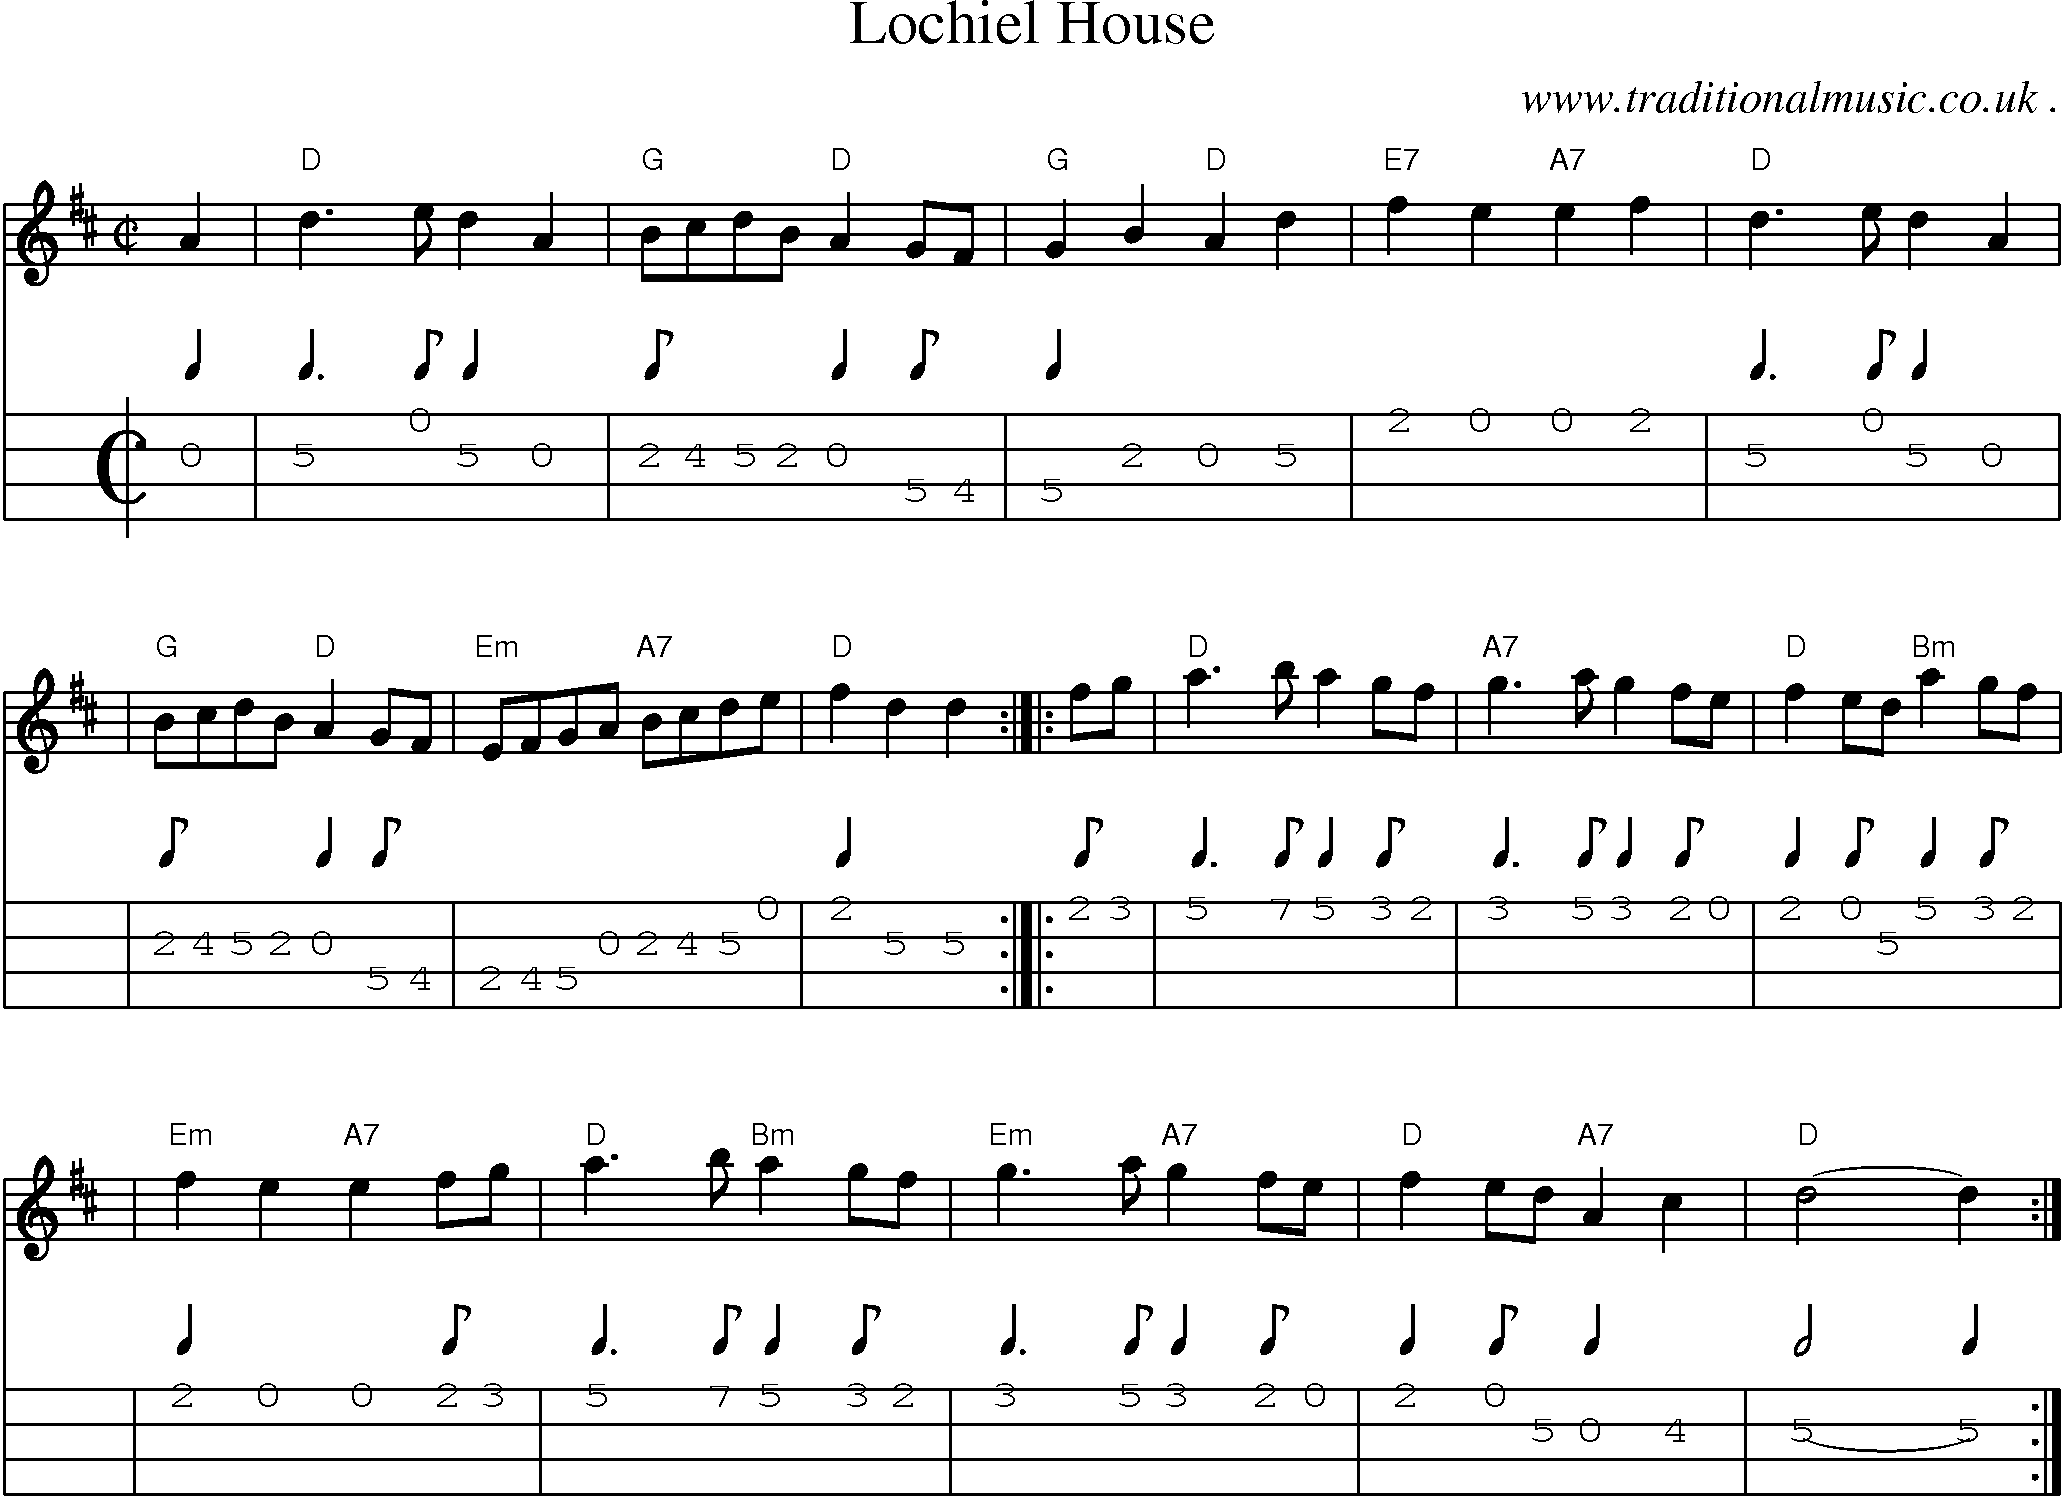 Sheet-music  score, Chords and Mandolin Tabs for Lochiel House